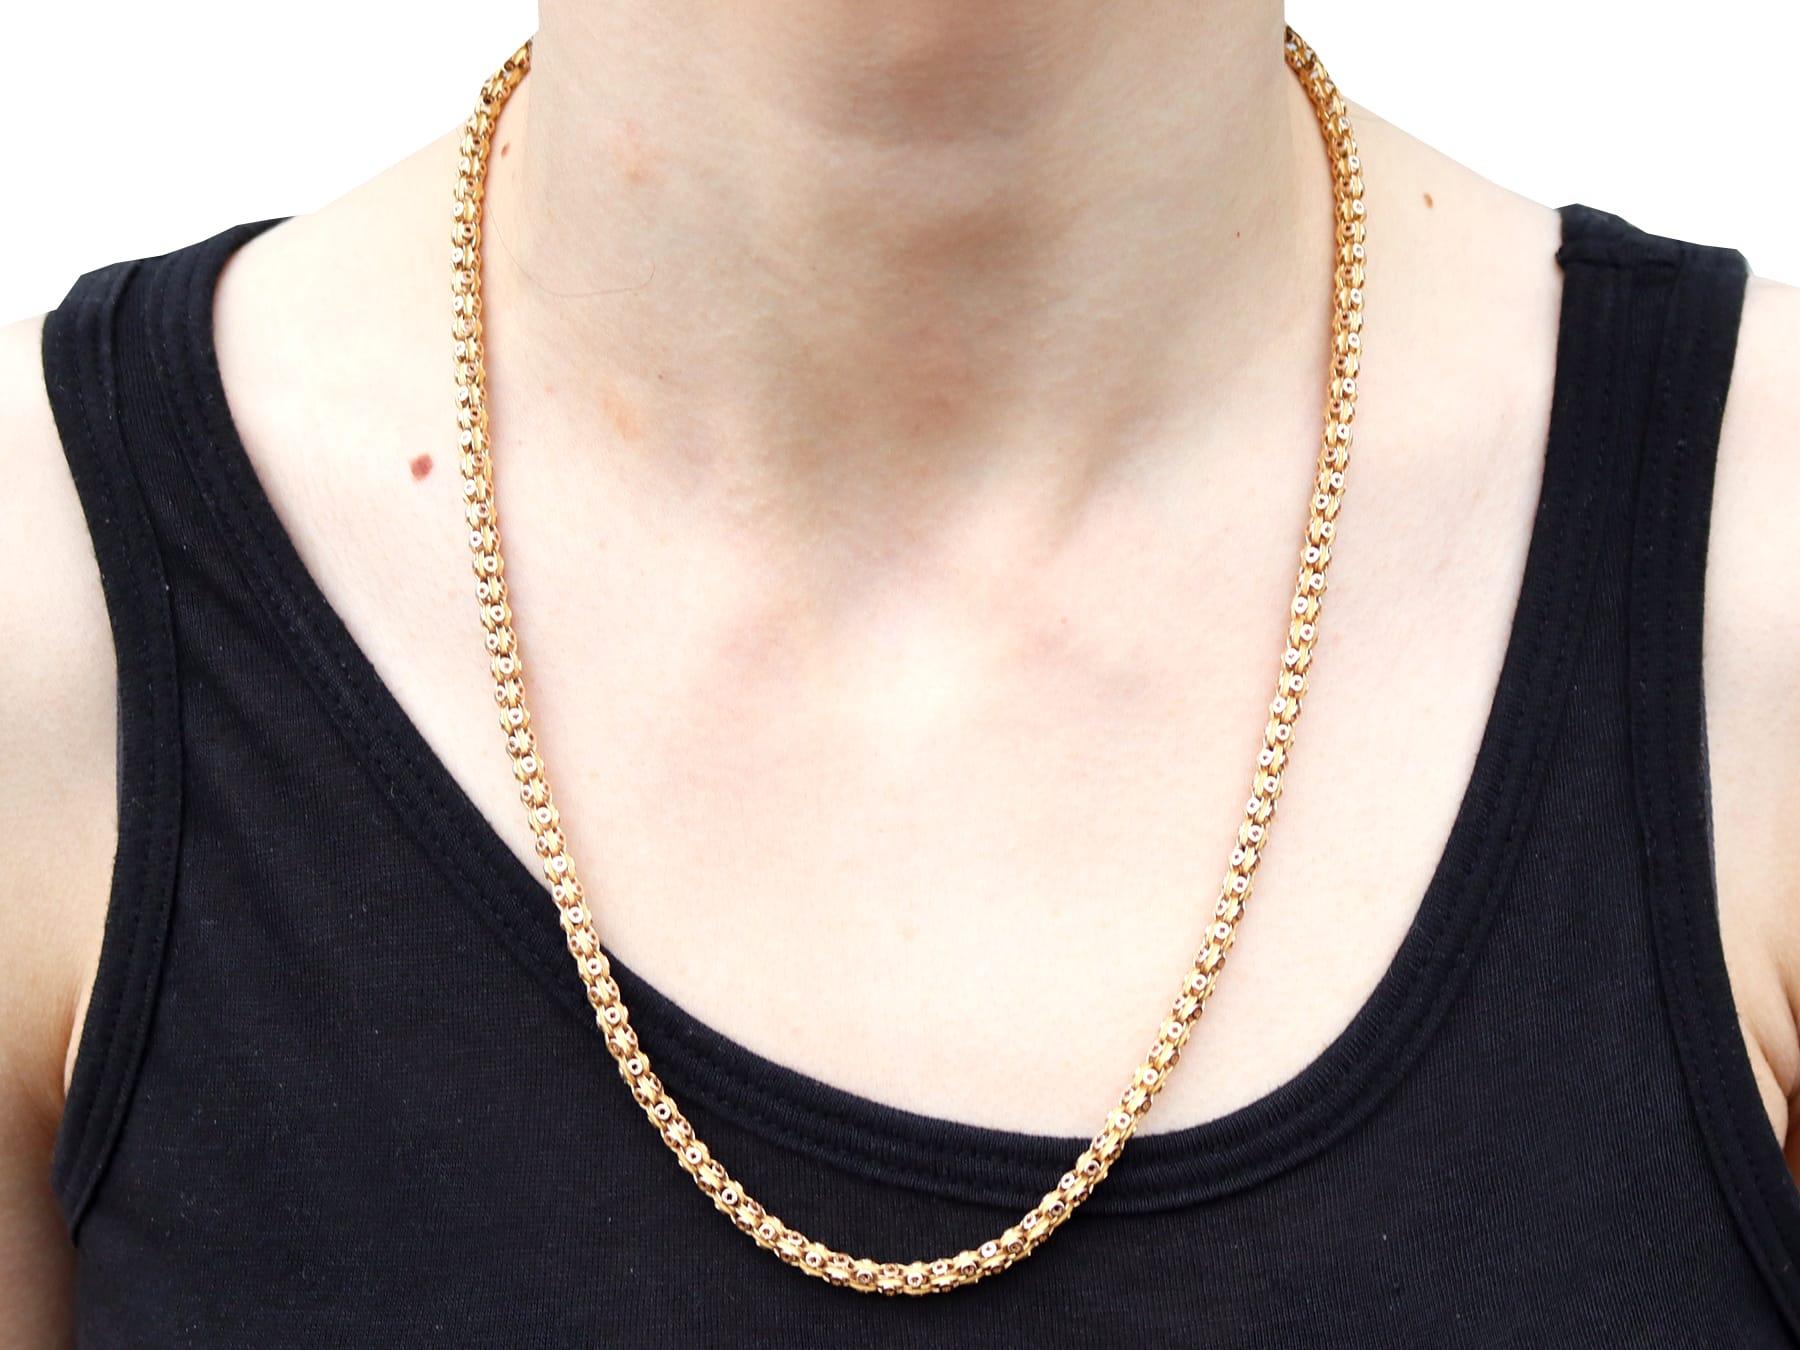 Women's or Men's Antique 15k Yellow Gold Chain Necklace Circa 1870 For Sale